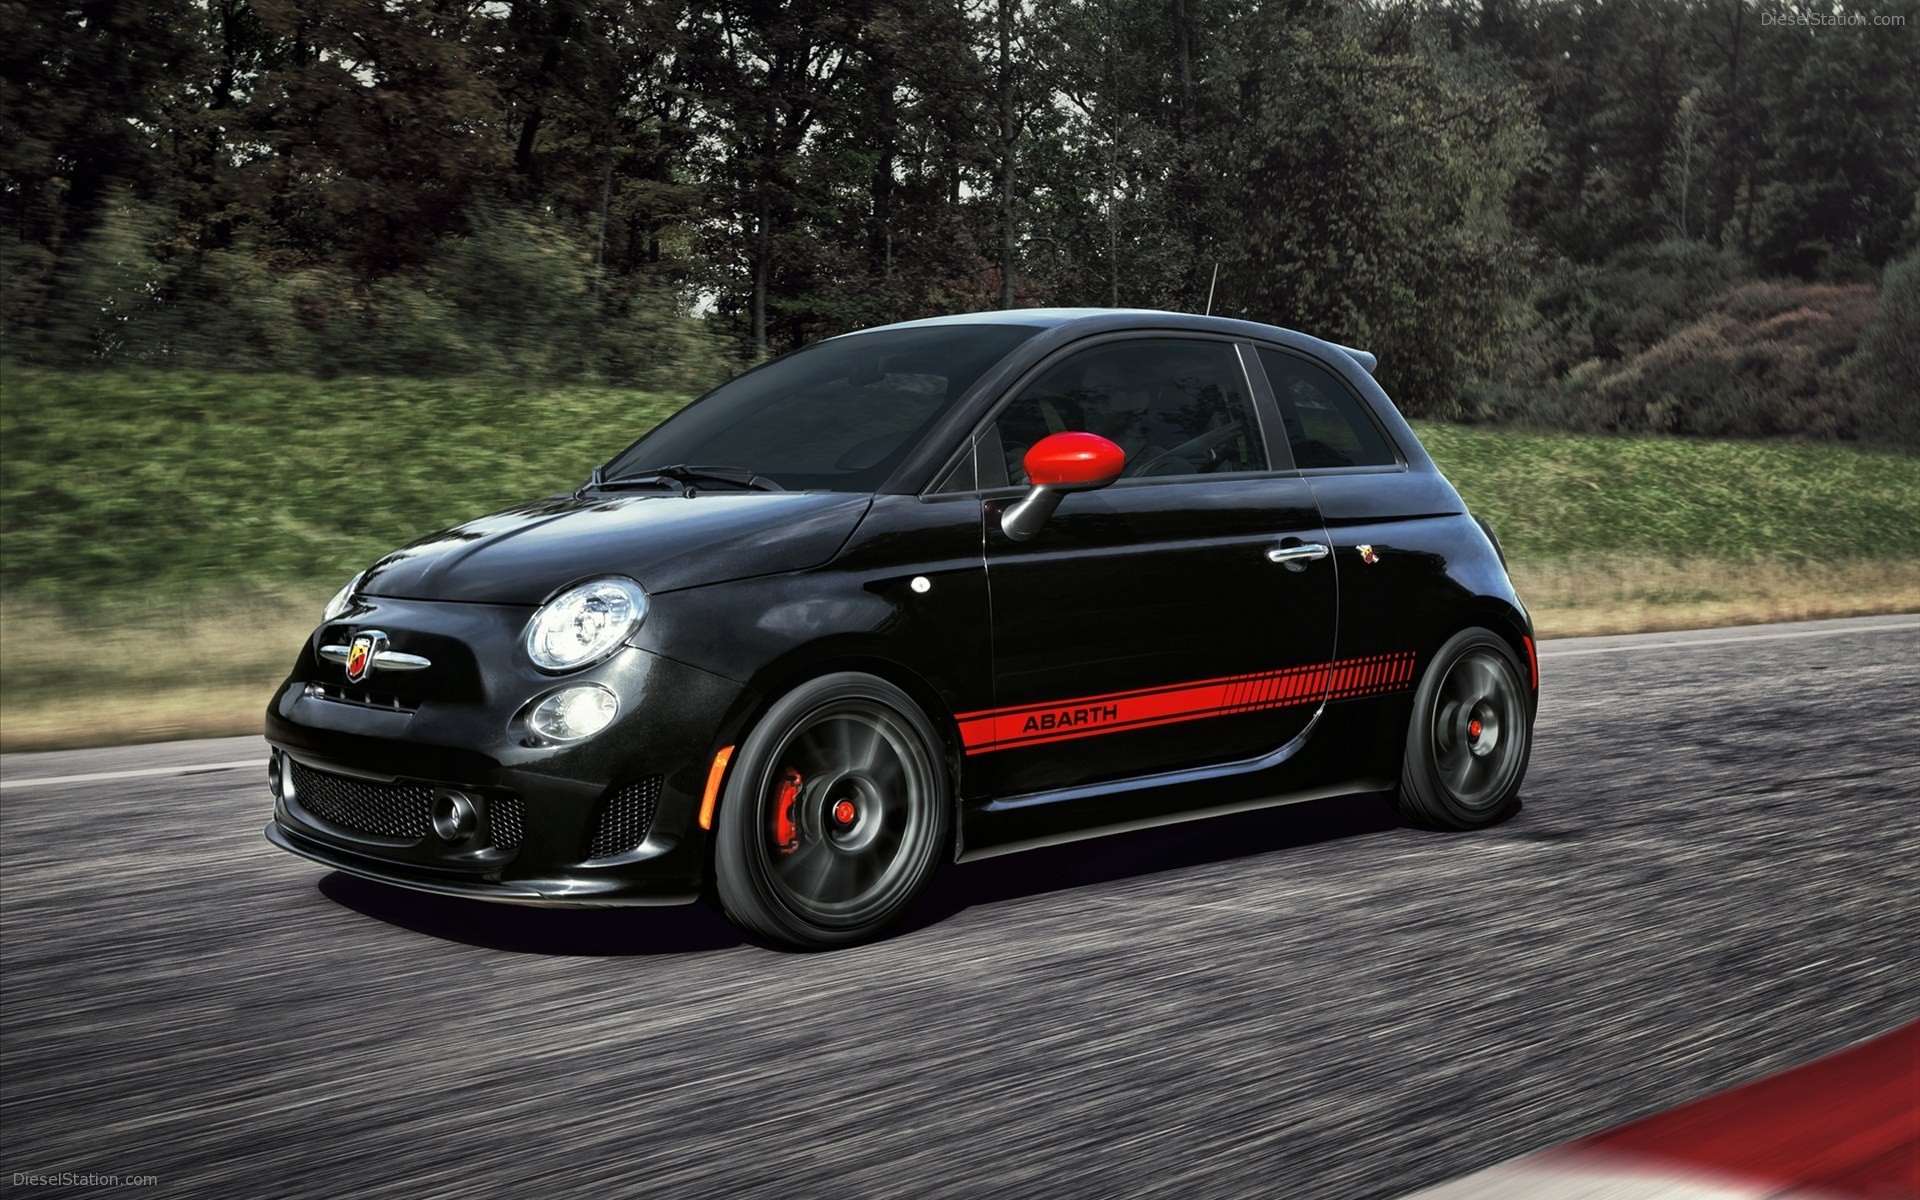 1920x1200 Fiat Abarth Turbo Awesome Fiat 500 Abarth 2012 Widescreen Exotic Car  Wallpapers 20